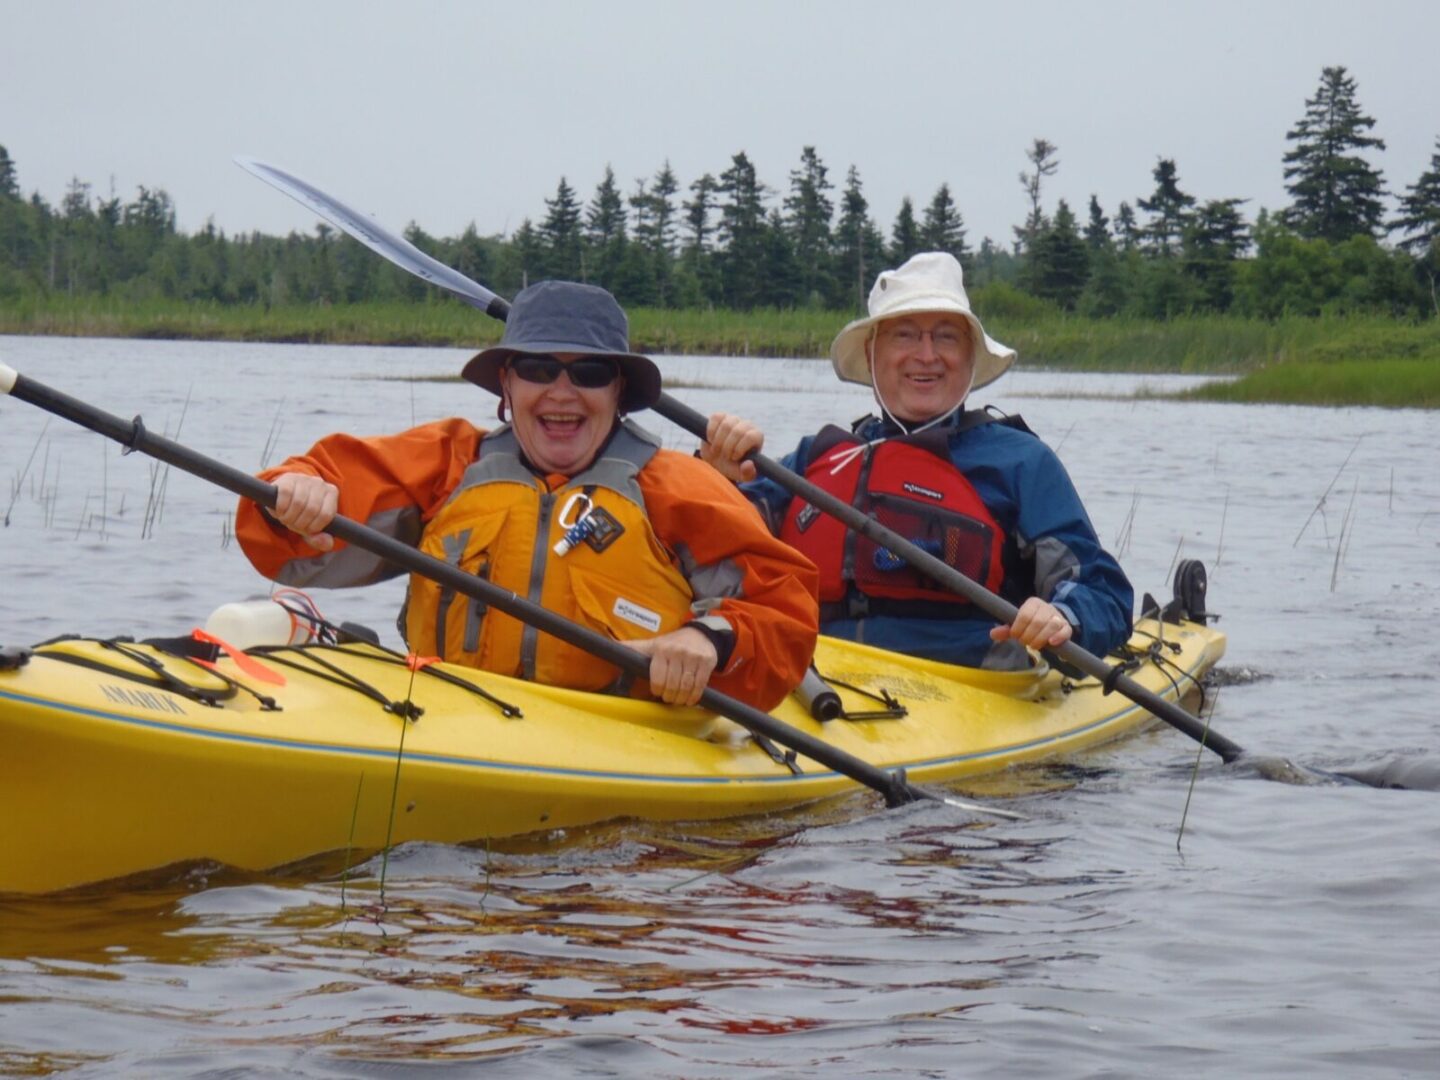 Two people in a yellow kayak.